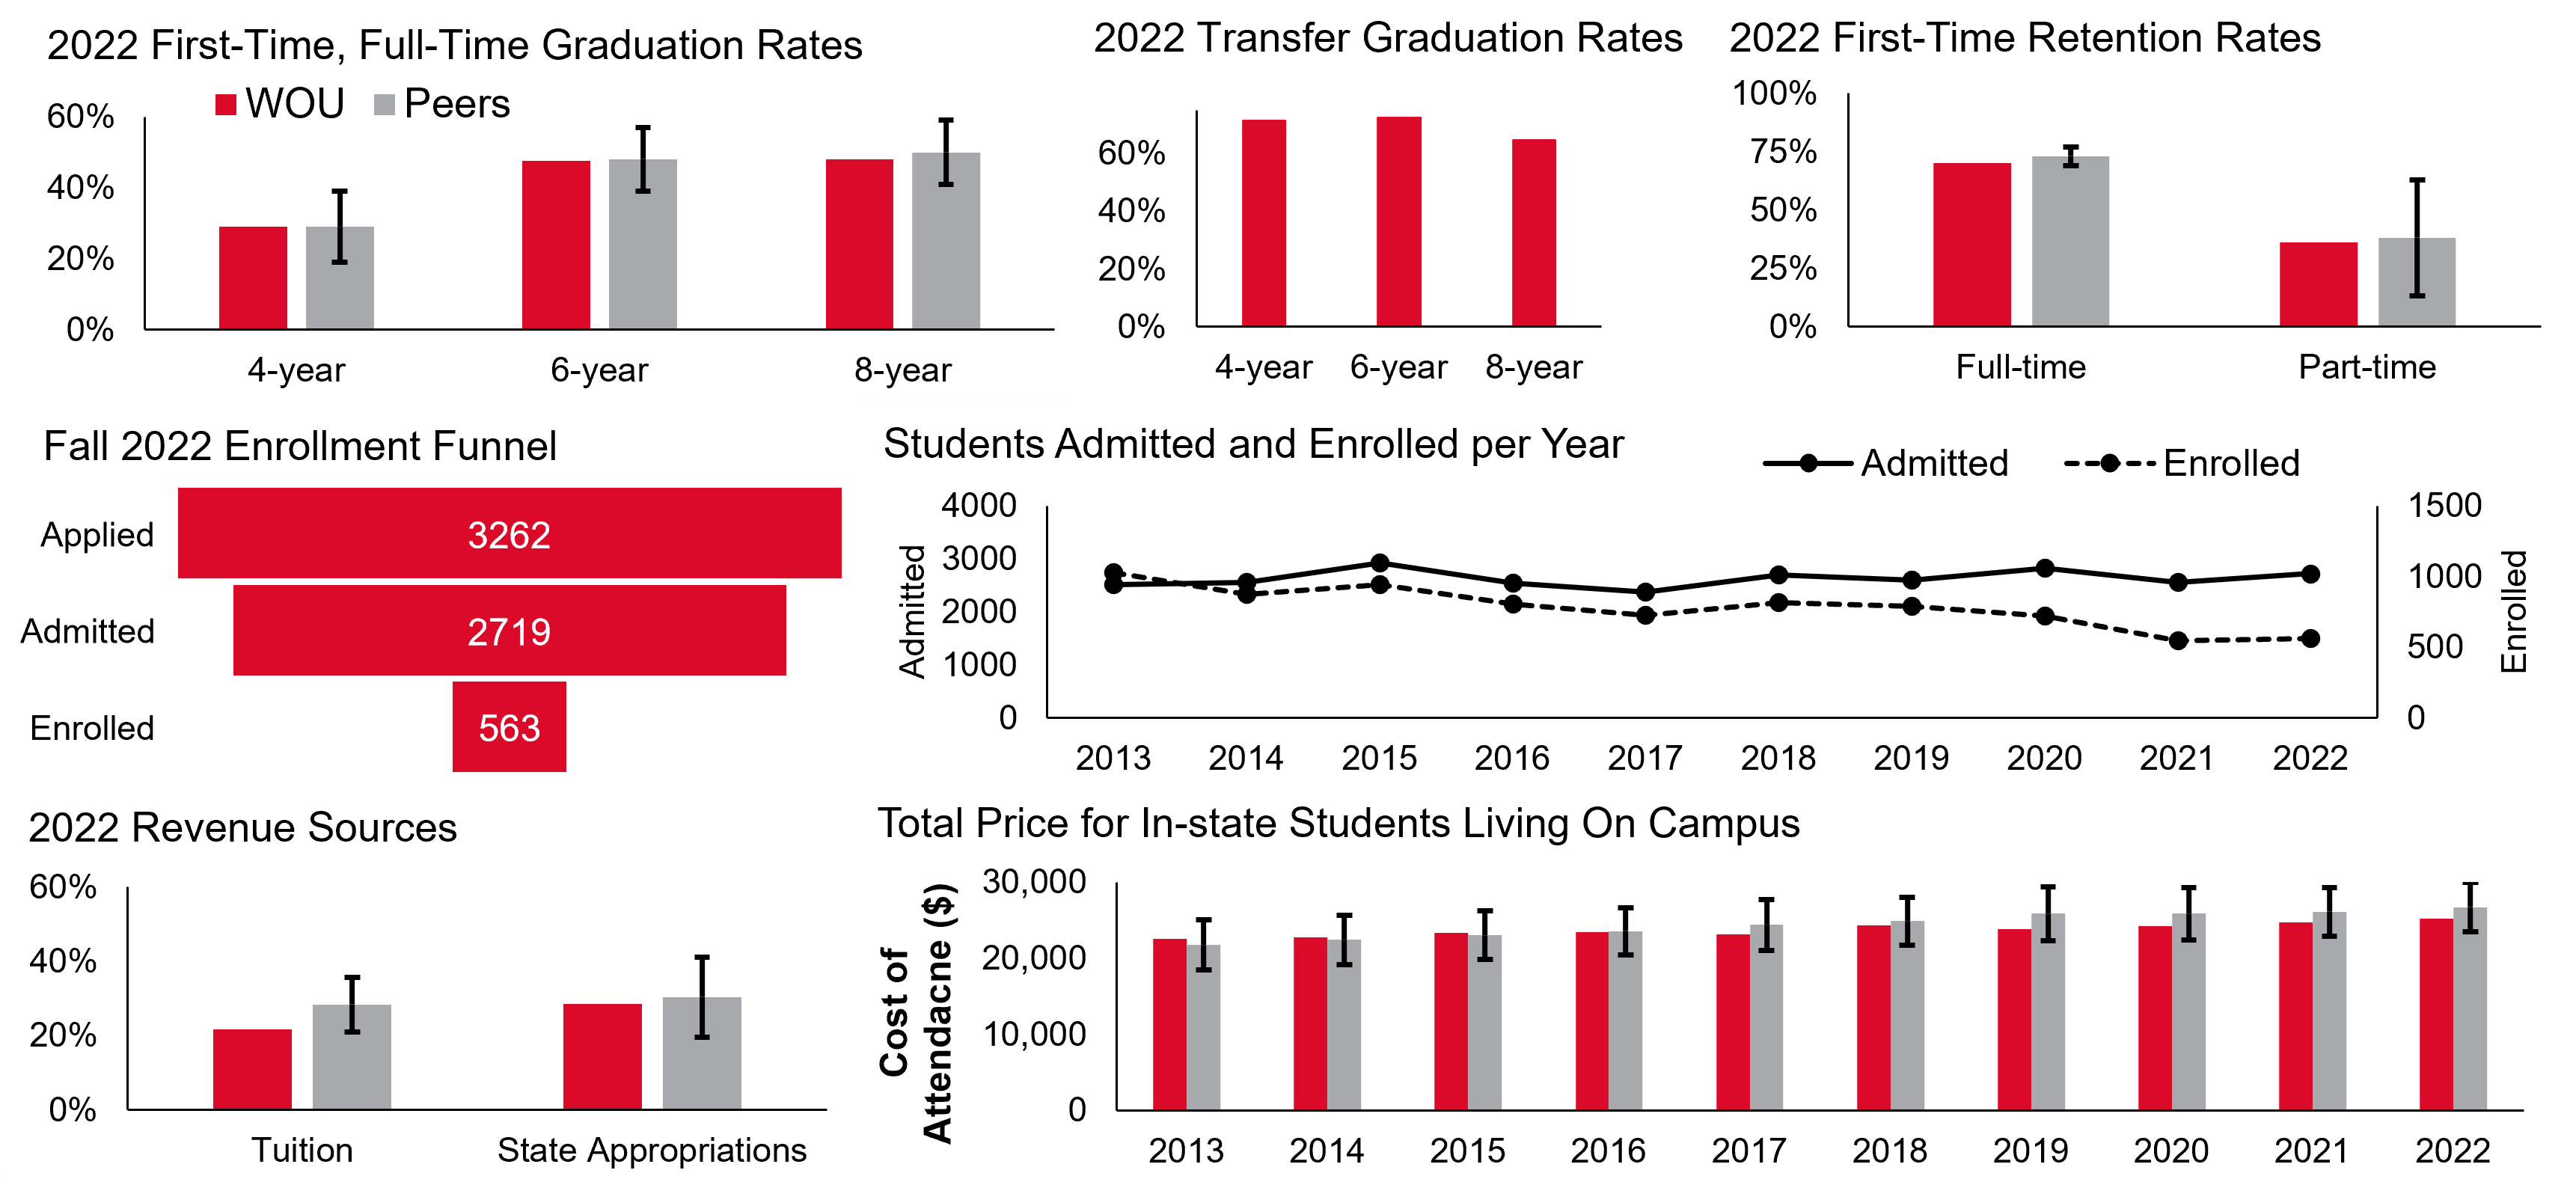 Figure showing key metrics at WOU including retention rates, graduation rates, admitted applicants, enrolled applicants, revenue sources, and cost of attendance